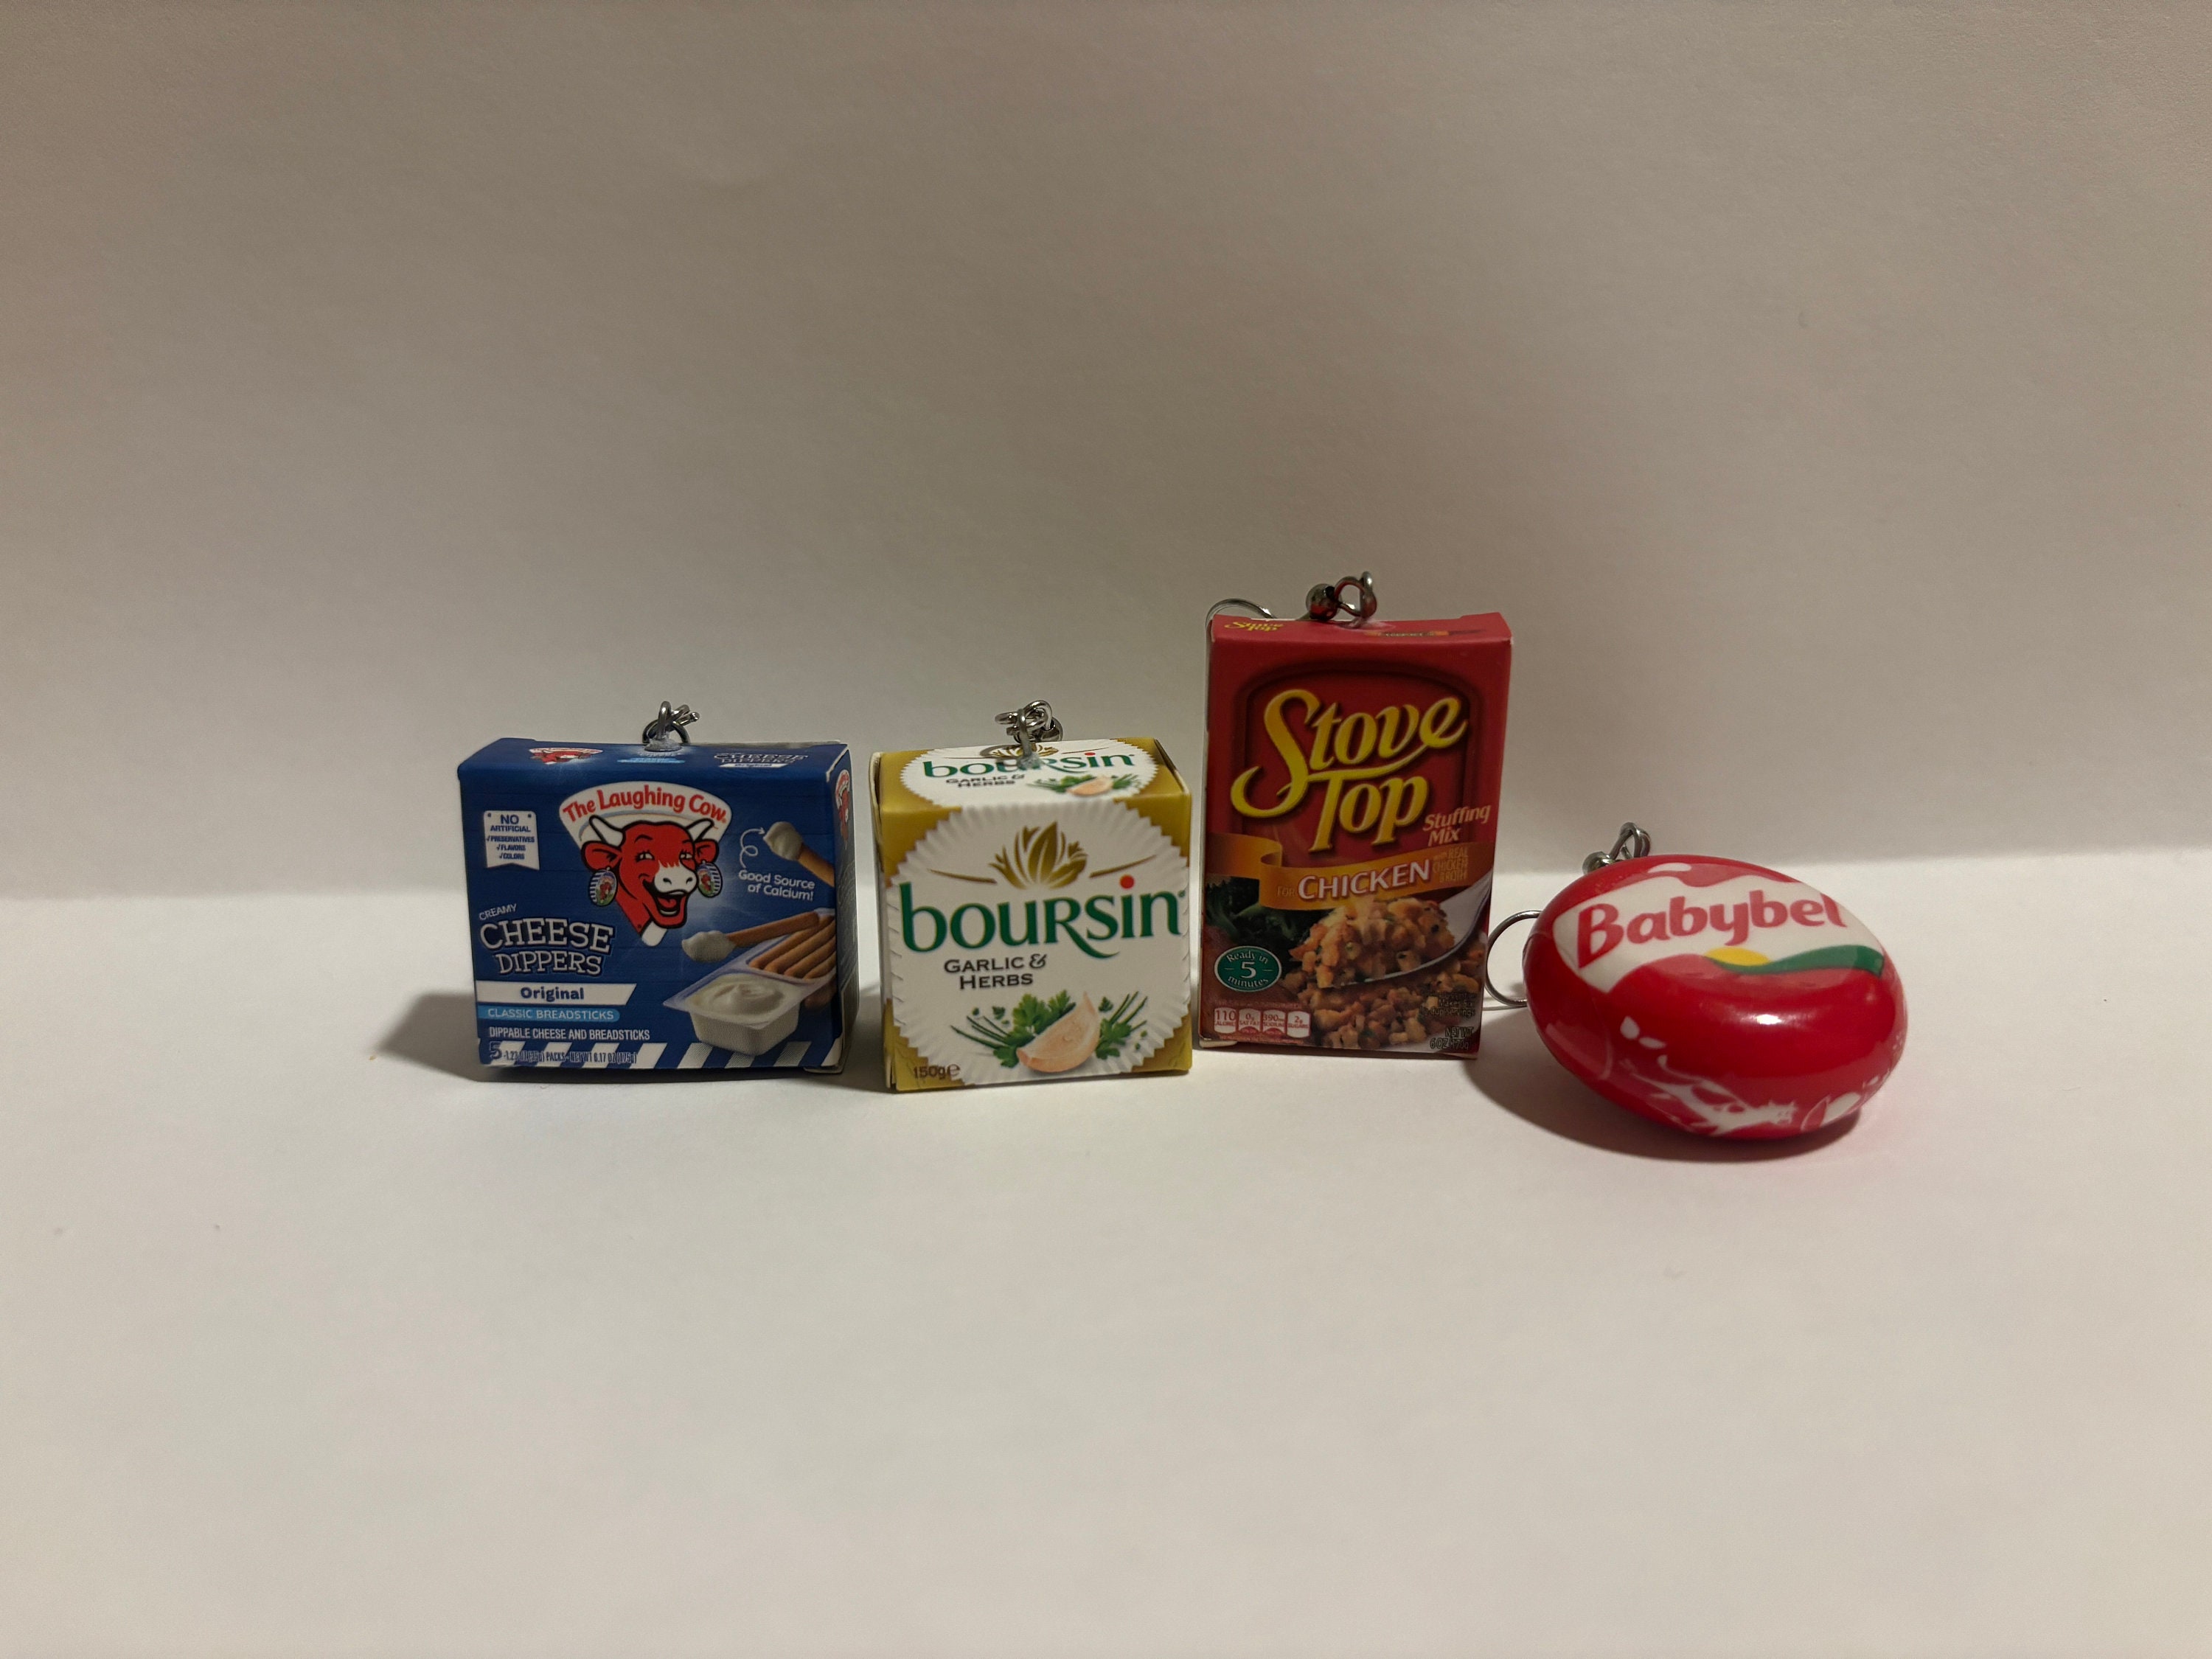 Extreme RARE GOLD Babybel Cheese MINI BRANDS